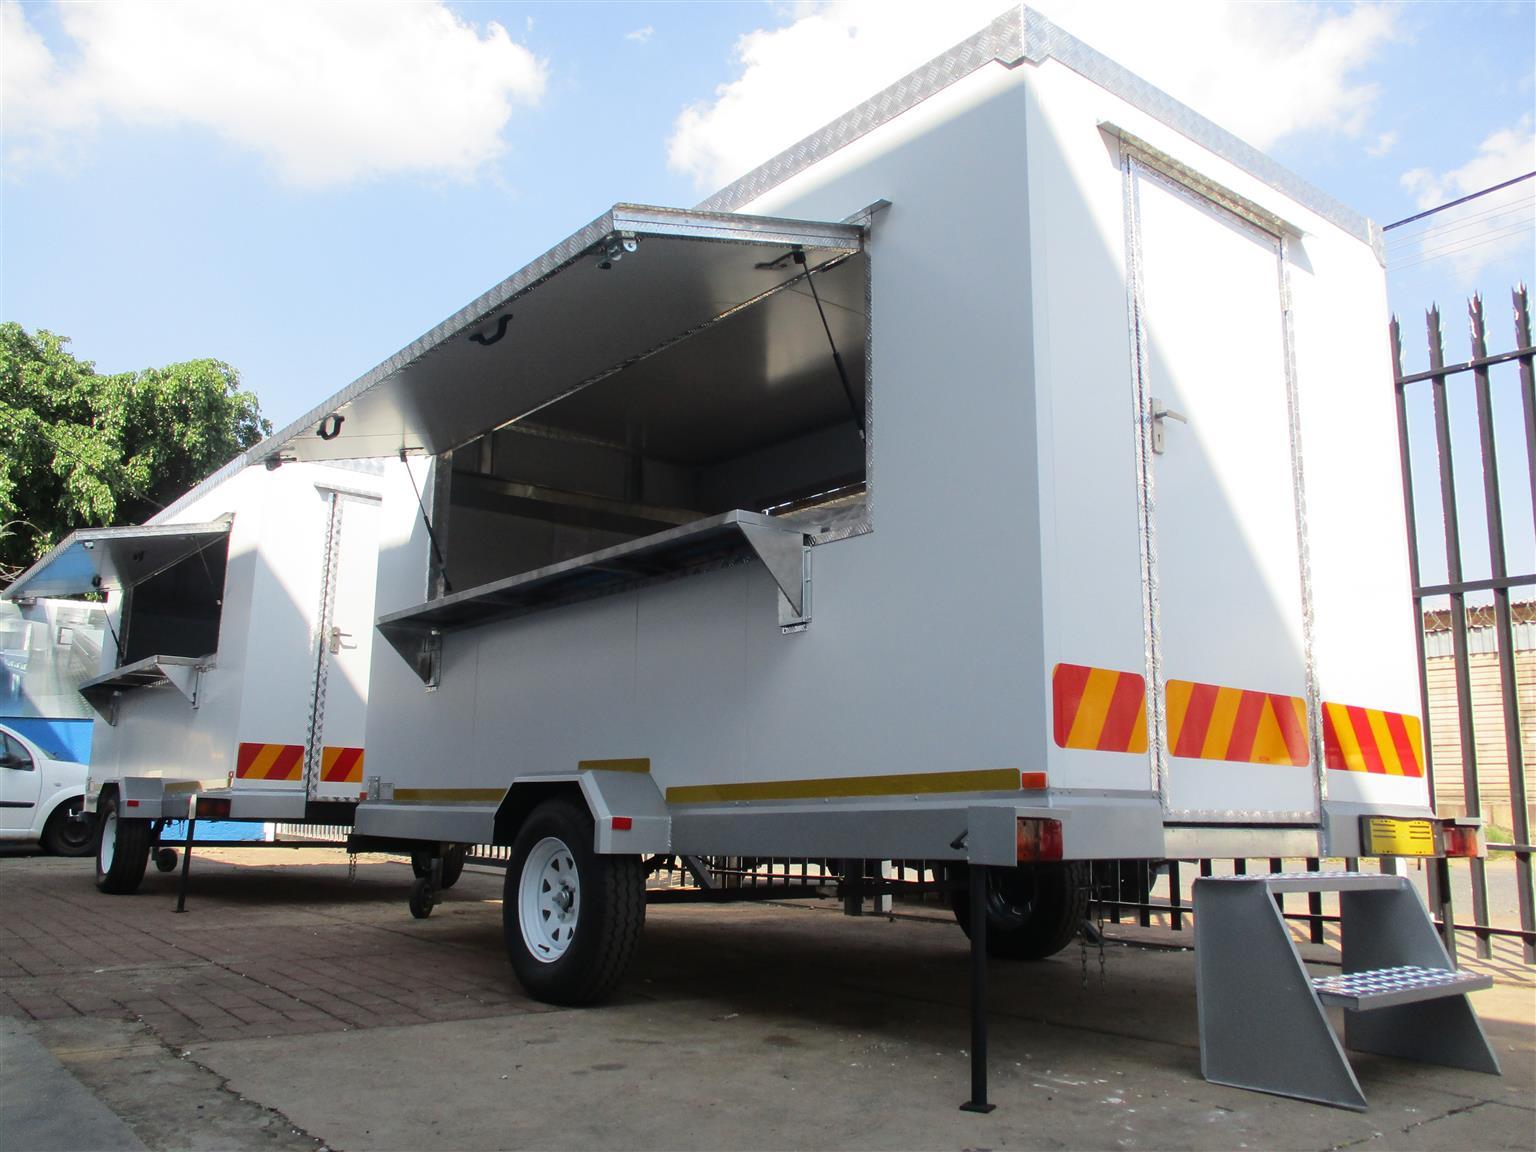 How to start a mobile kitchen business in South Africa